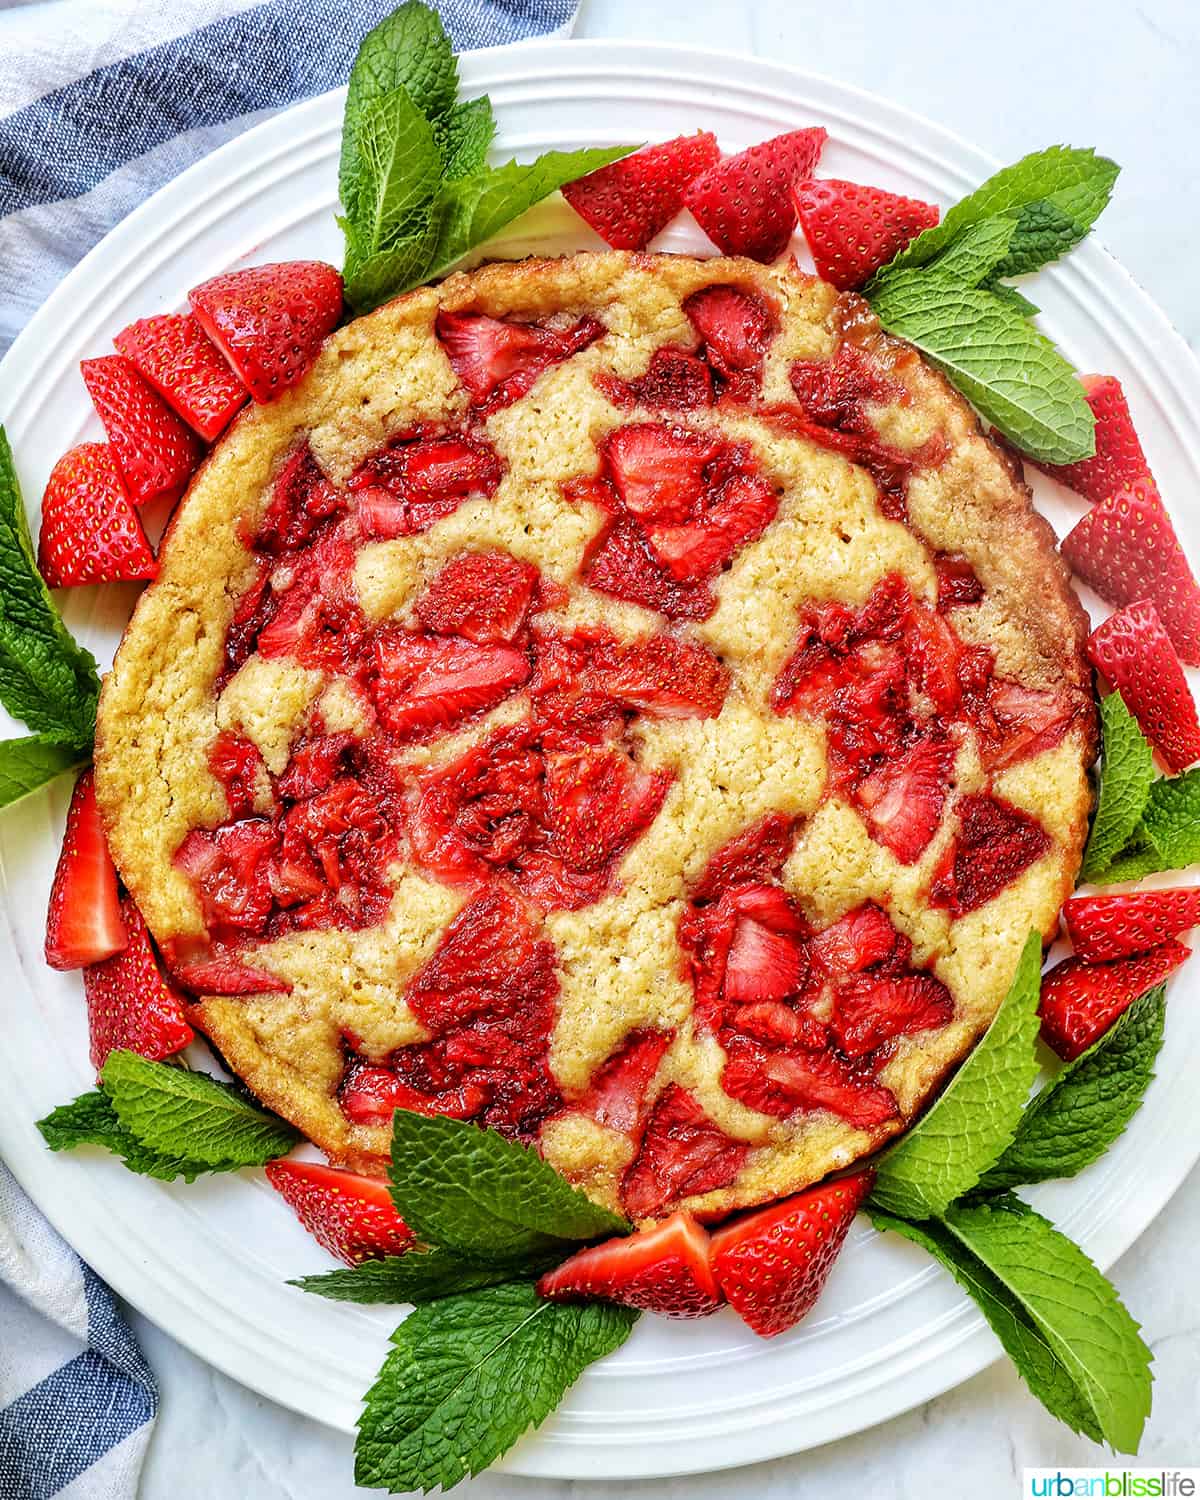 Strawberry Spoon Cake with mint leaves and sliced strawberries as garnish on a white plate.